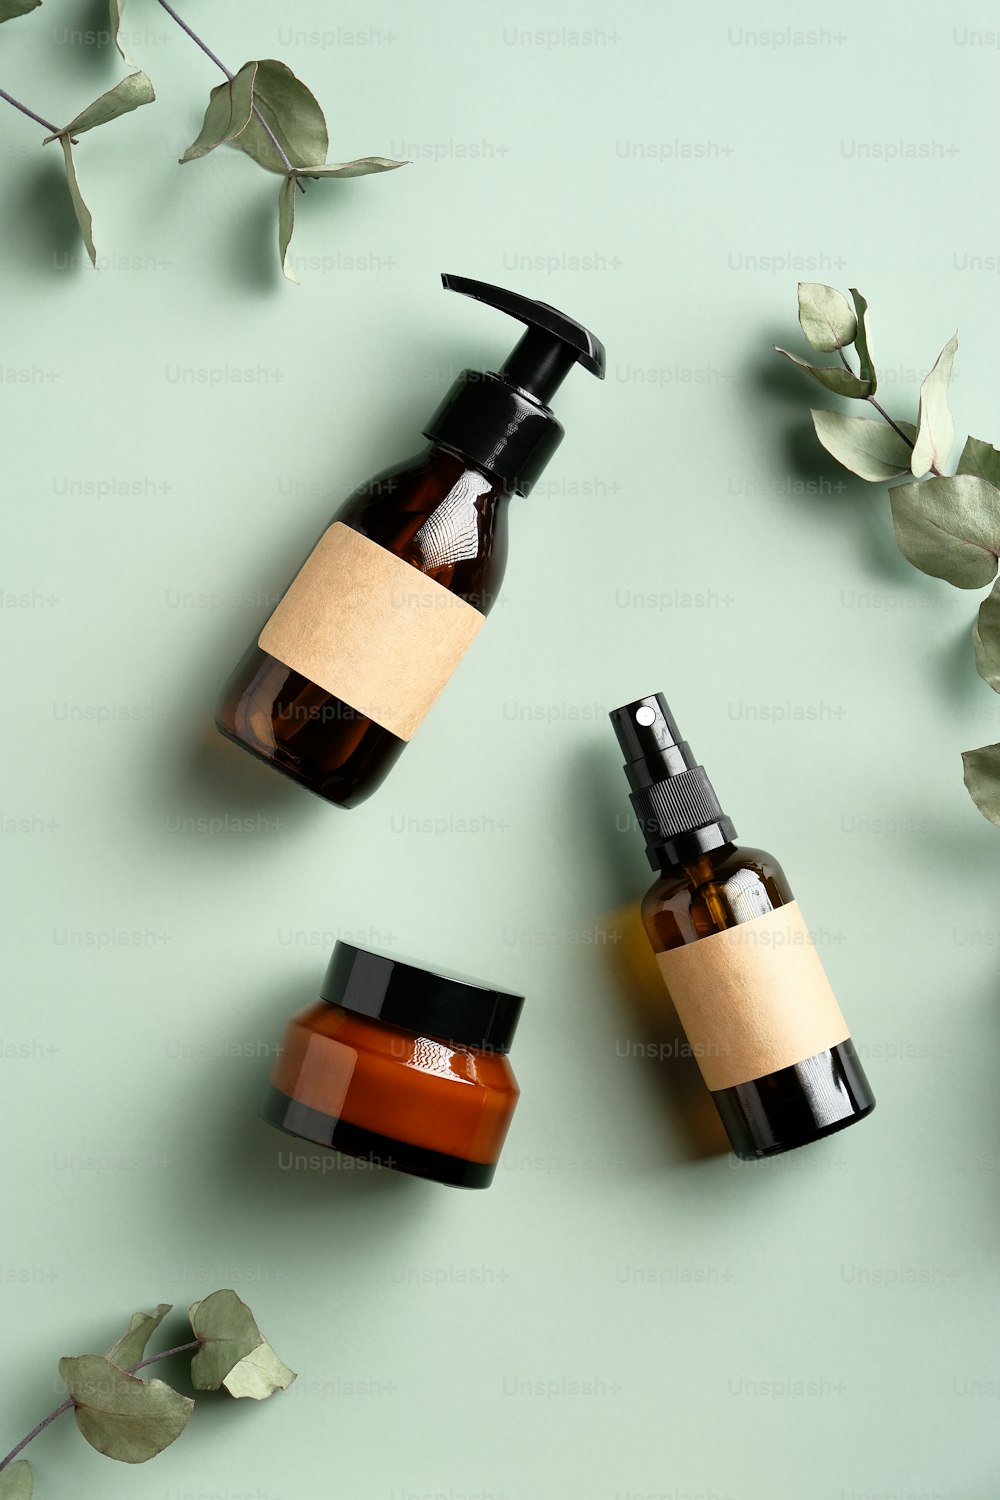 SPA cosmetics products branding mockup. Flat lay amber glass shampoo dispenser, spray bottle, jar of moisturizer cream and eucalyptus leaves on green background. Natural organic skincare products set